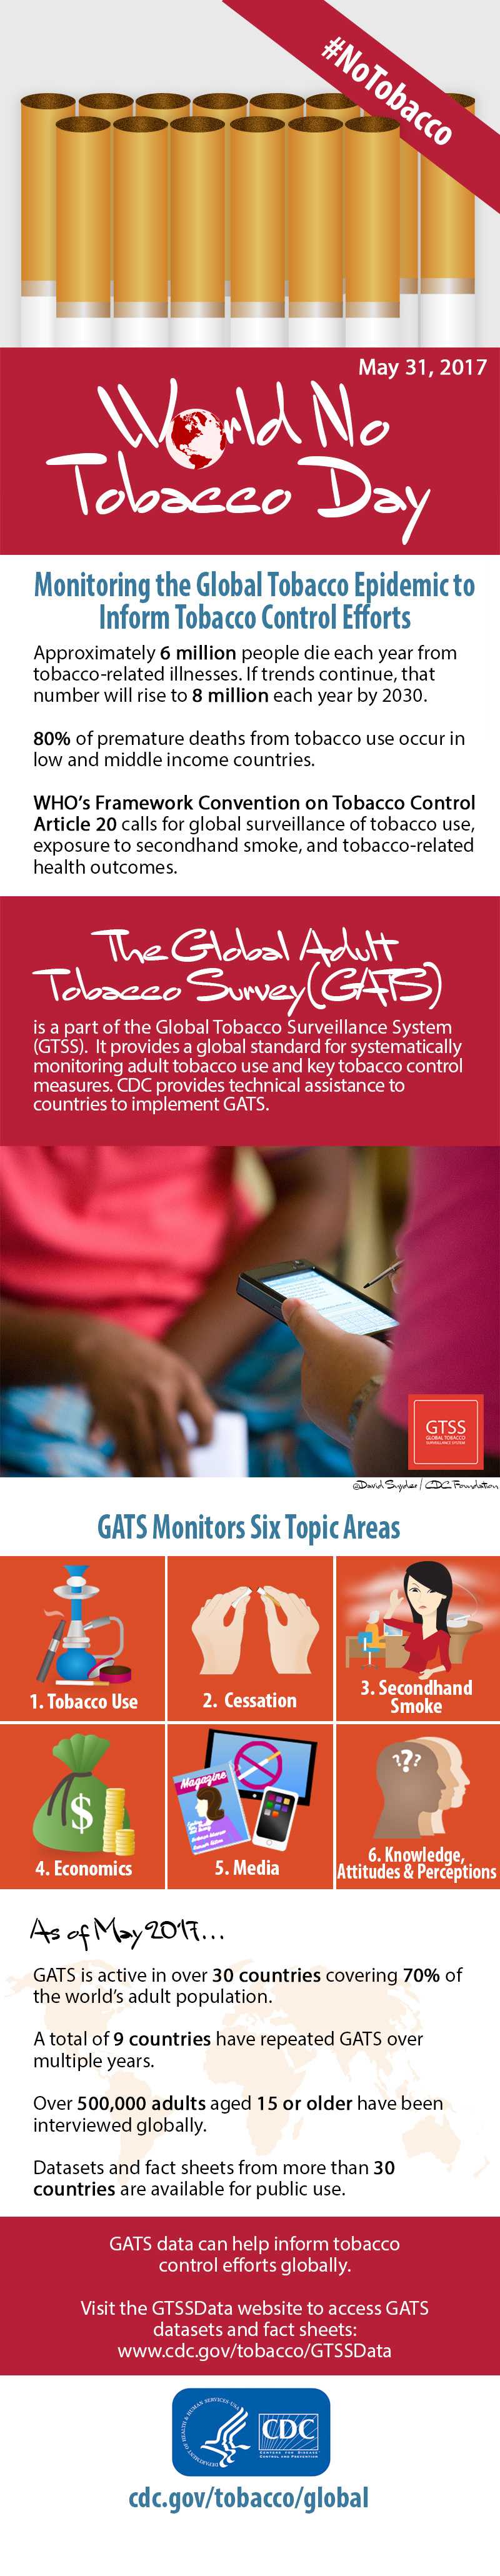 World No Tobacco Day 2017 - Monitoring the Global Tobacco Epidemic to Inform Tobacco Control Efforts